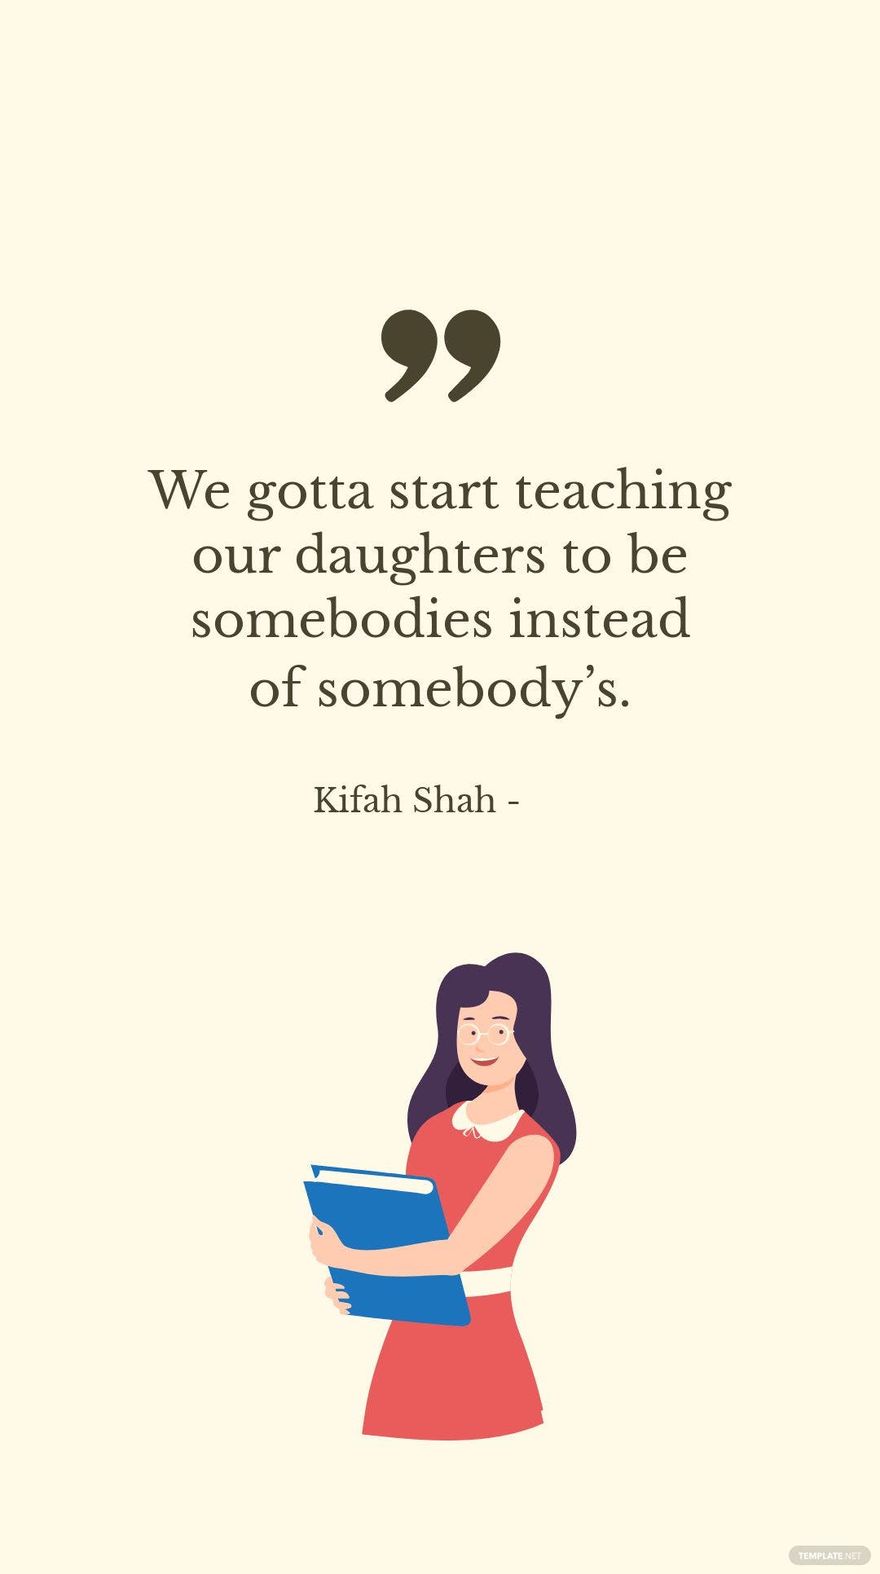 Free KIFAH SHAH - We gotta start teaching our daughters to be somebodies instead of somebody’s. in JPG